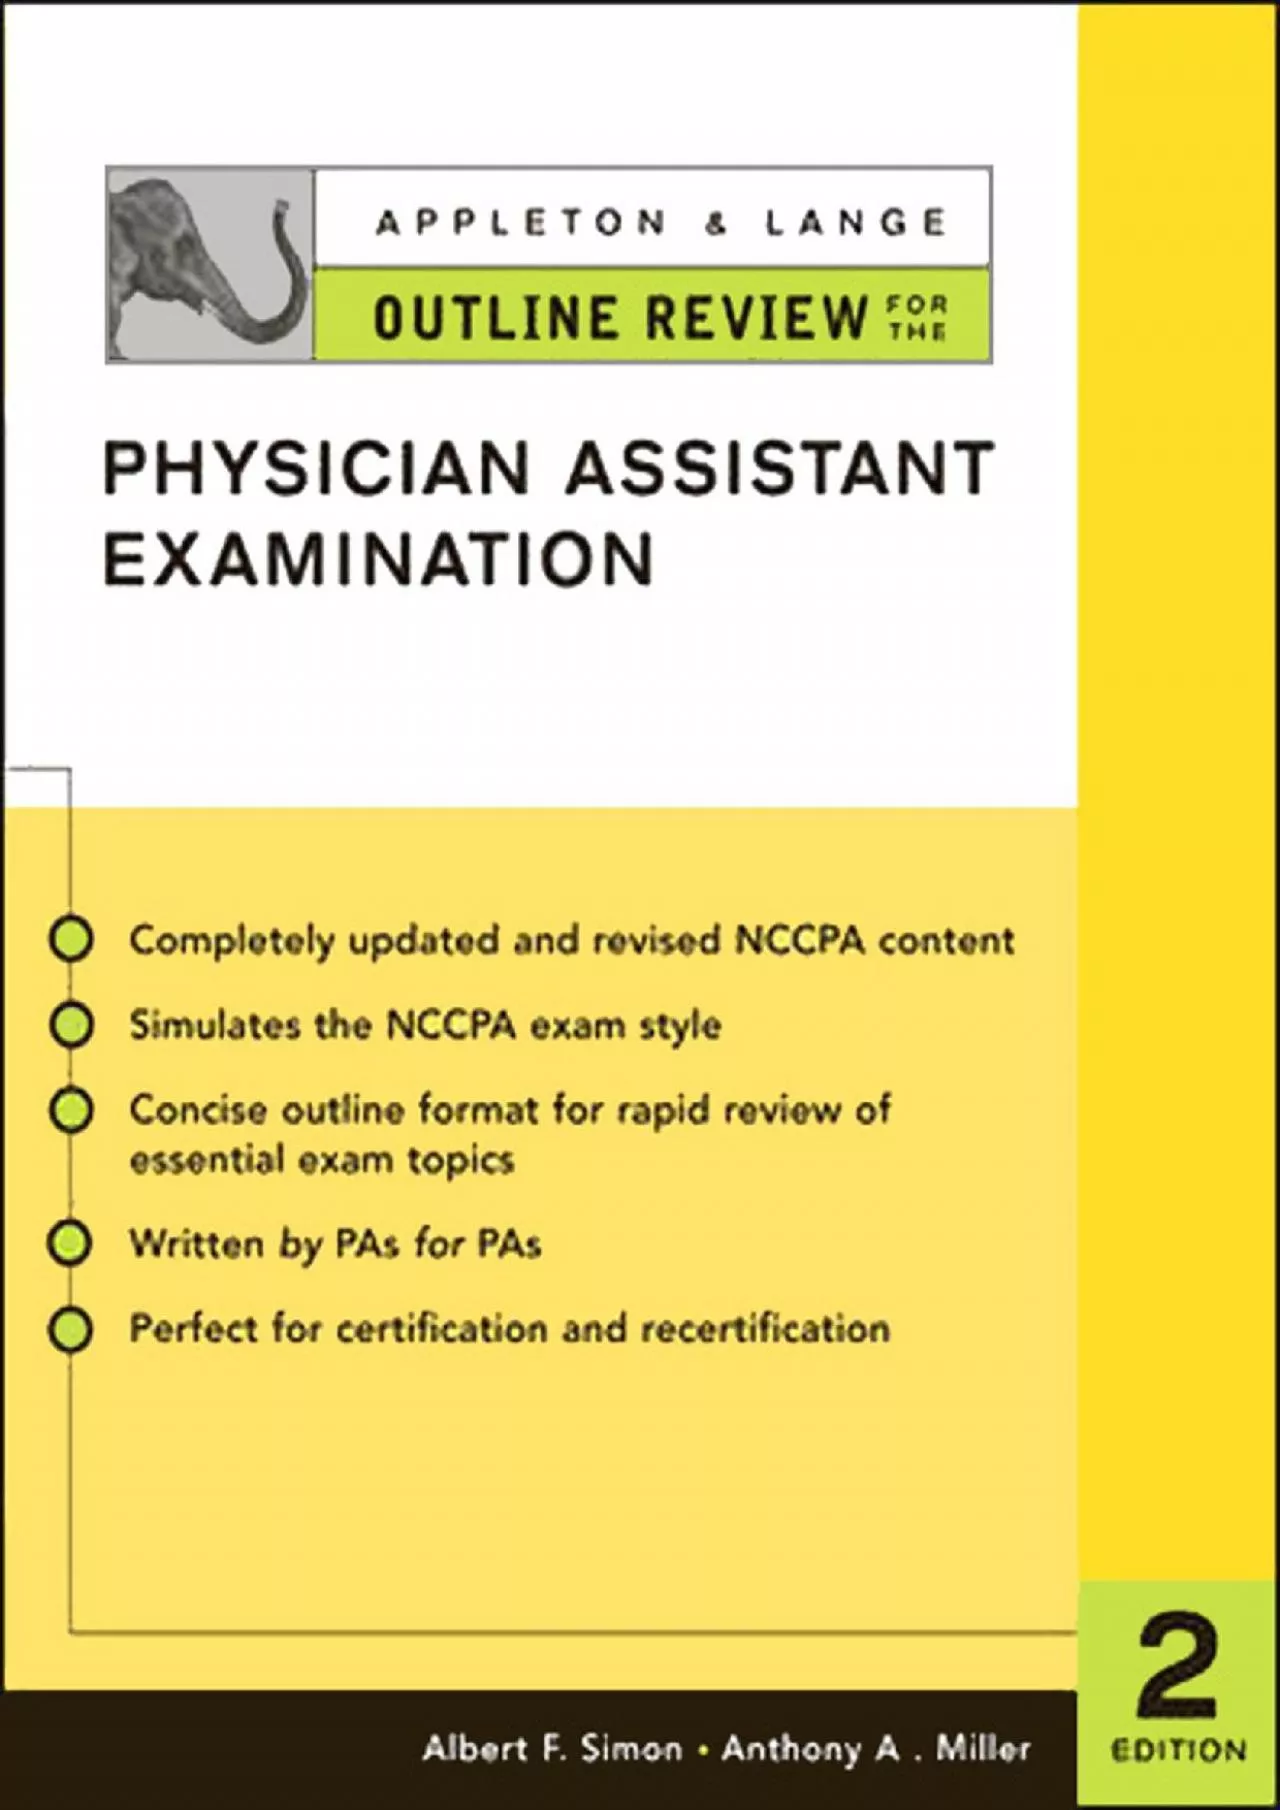 (BOOK)-Appleton & Lange Outline Review for the Physician Assistant Examination, Second